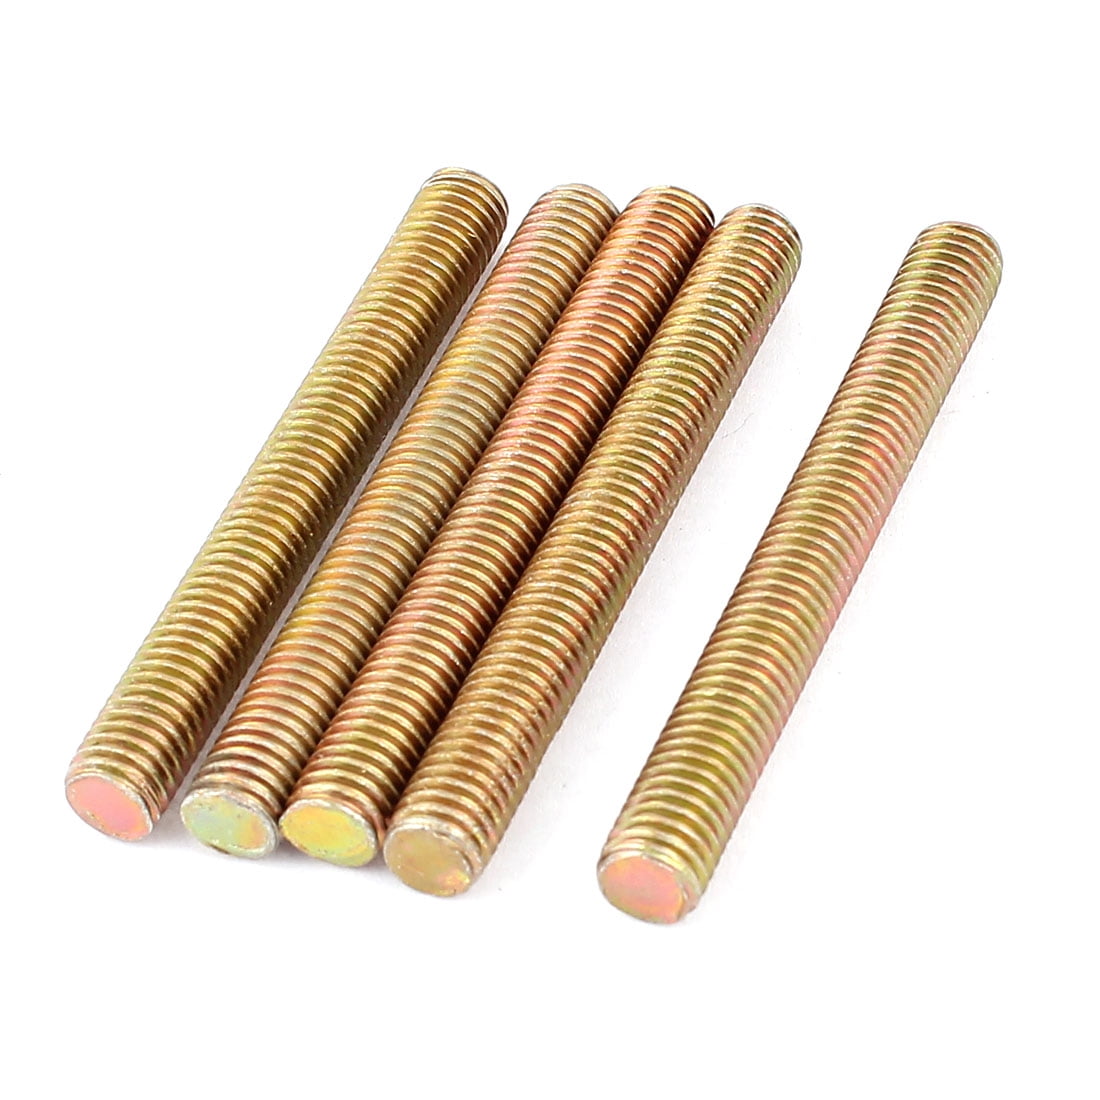 1.25 mm Pitch M8 x 130 mm Full Threaded Metal Rod Bronze Tone Pack of 4 